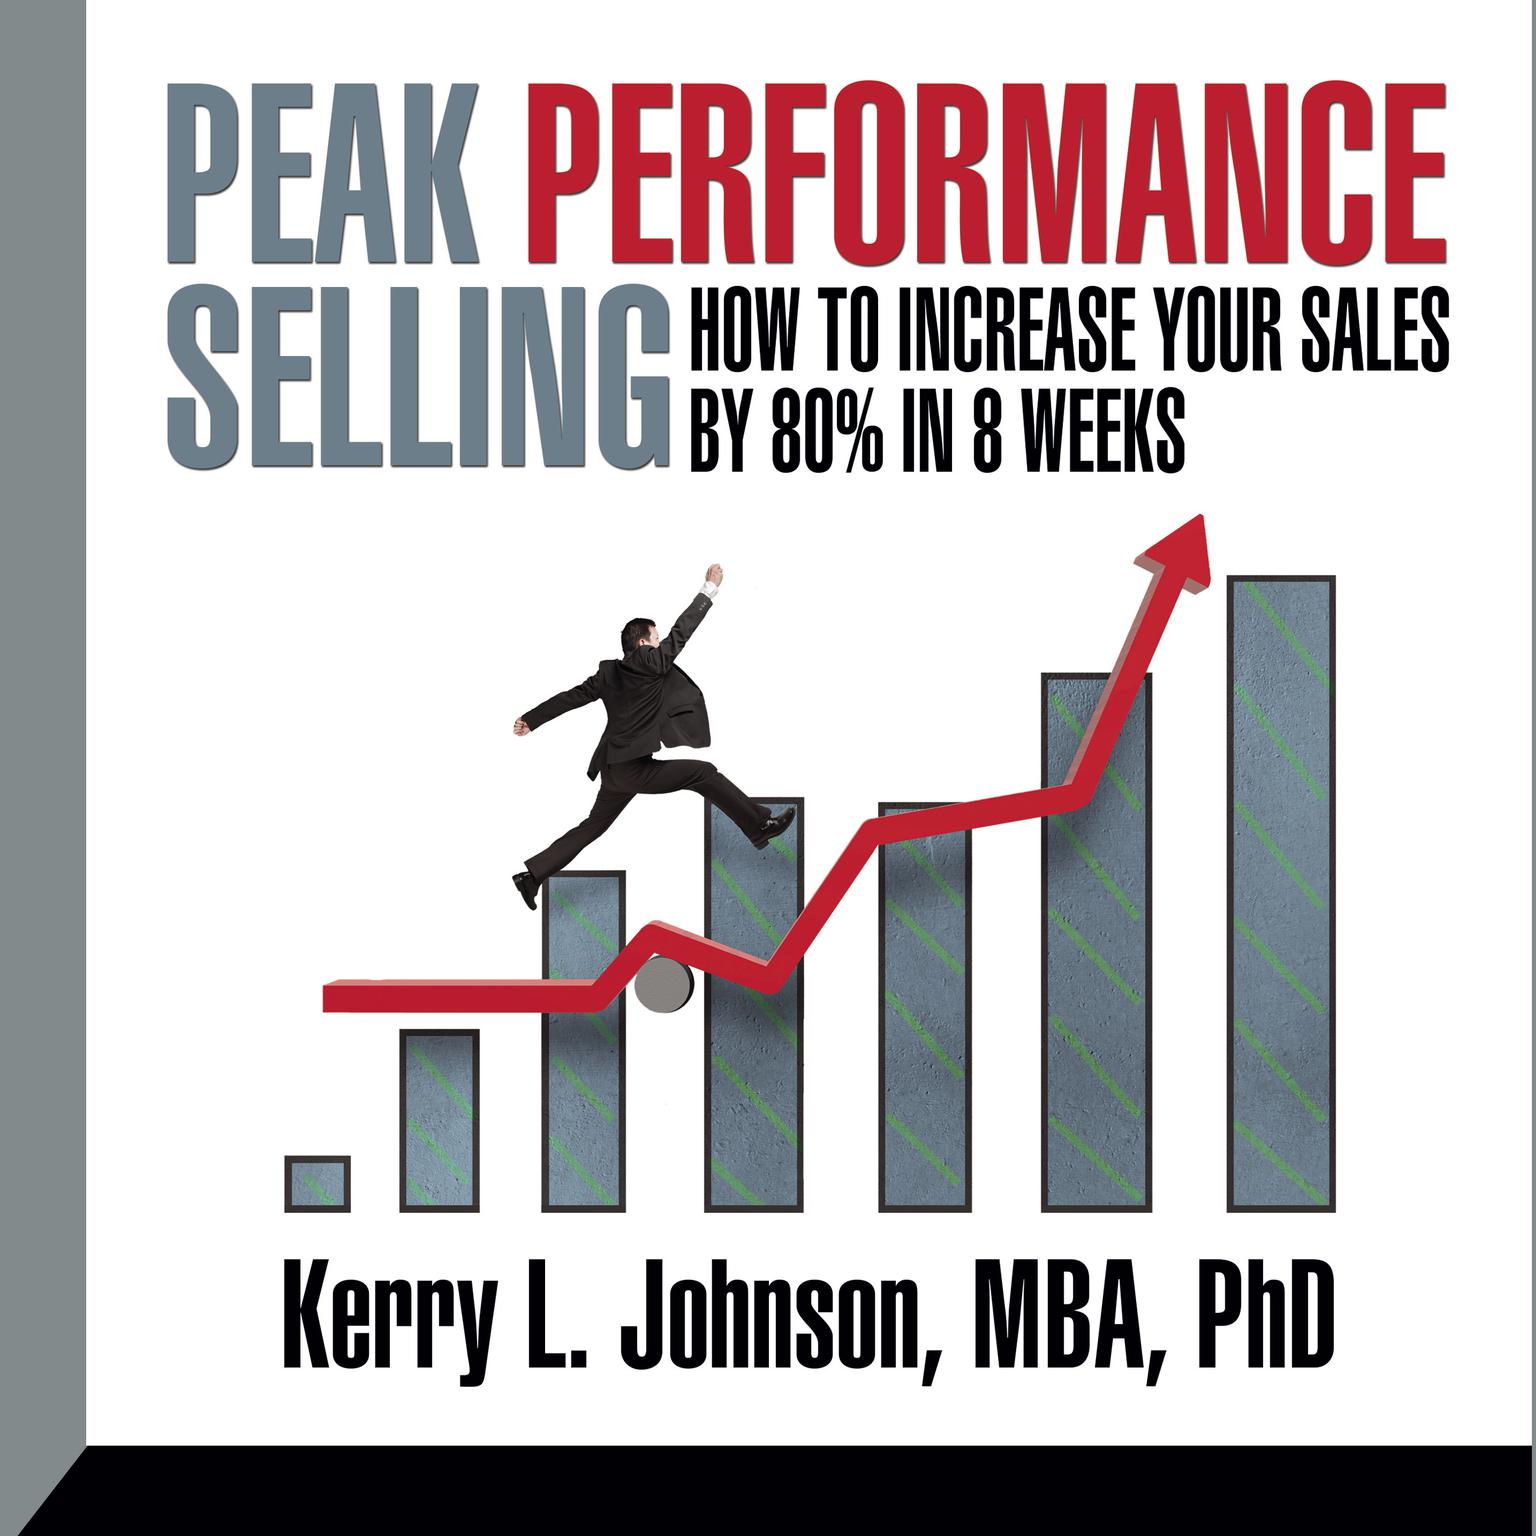 Peak Performance Selling: How to increase your sales by 80% in 8 weeks Audiobook, by Kerry Johnson